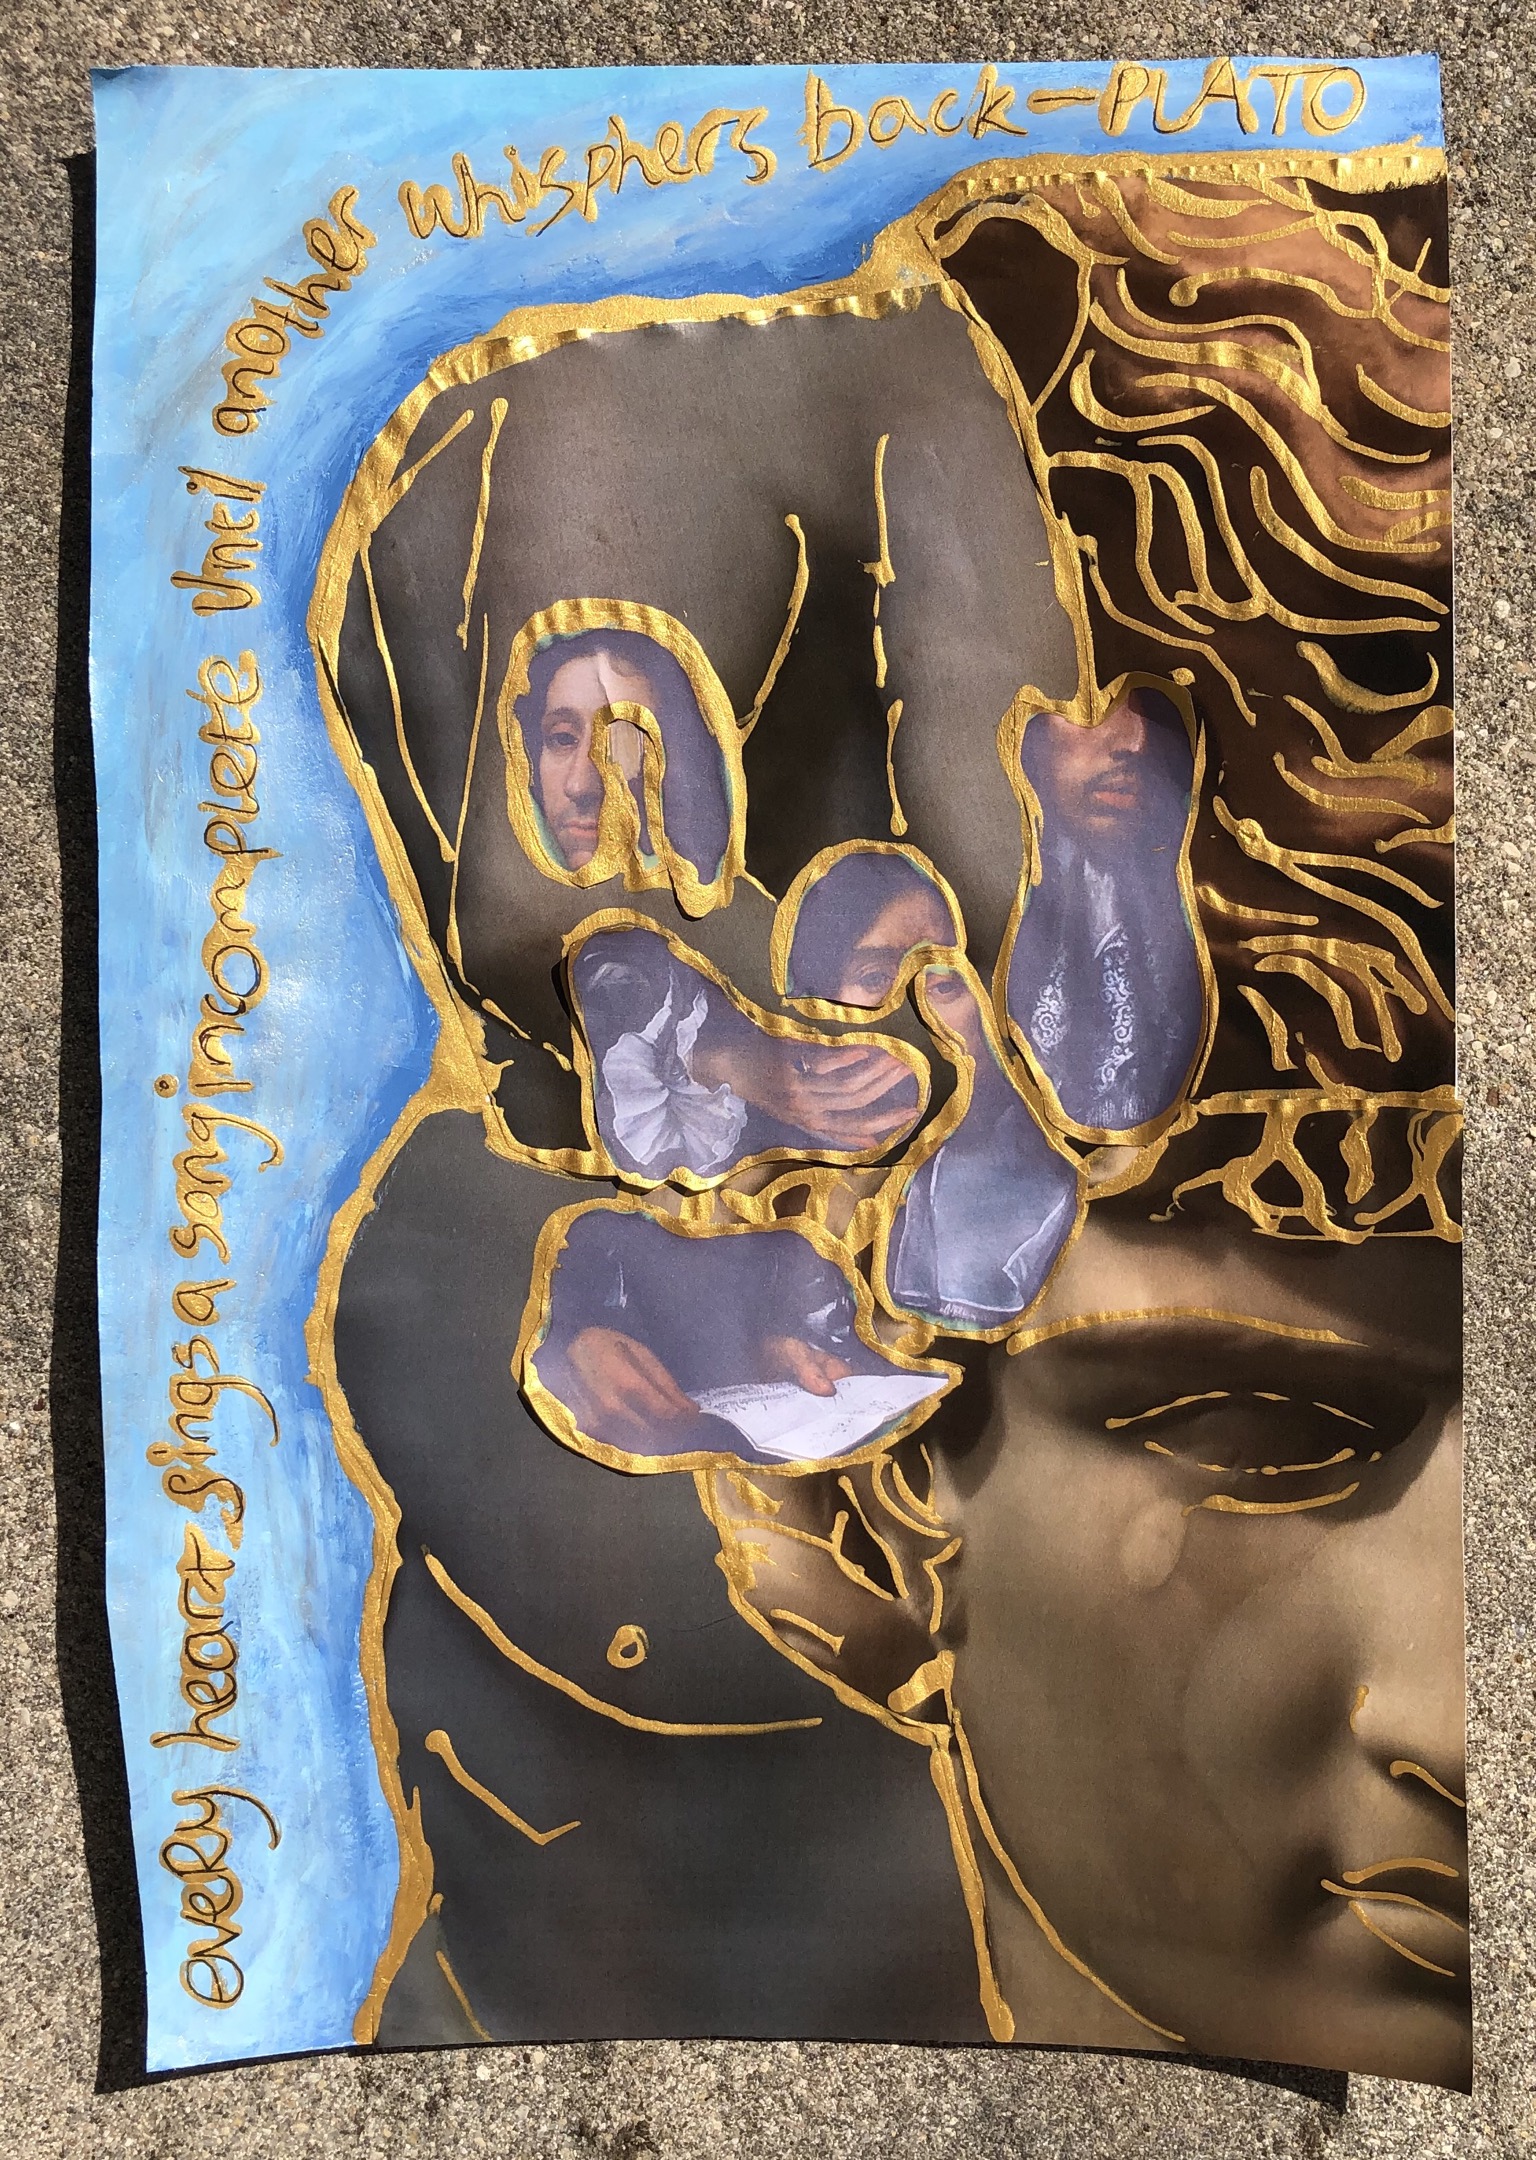 This is a photograph of a paper collage made from cut up paper and paint. Working from left to right: the words “every heart sings a song incomplete until another whispers back - Plato” is written from the bottom left hand corner up to the top left hand corner and curving round to the top right hand corner, and outlined in gold paint. The cut out hand and torso from a classical sculpture are set on top of one another, and outlined in gold, with fragments from portraits of Sir John Finch and Sir Thomas Baines positioned on top. We see part of Baines’s face with his curly dark hair and his hand with elaborate ruffled white cuff; Finch’s hands as they hold a letter; Baines’s square white collar; and the lower half of Finch’s face with moustache and lace collar. The rest of the image is filled with the left hand side of the face of a classical sculpture of a young man, outlined in gold.